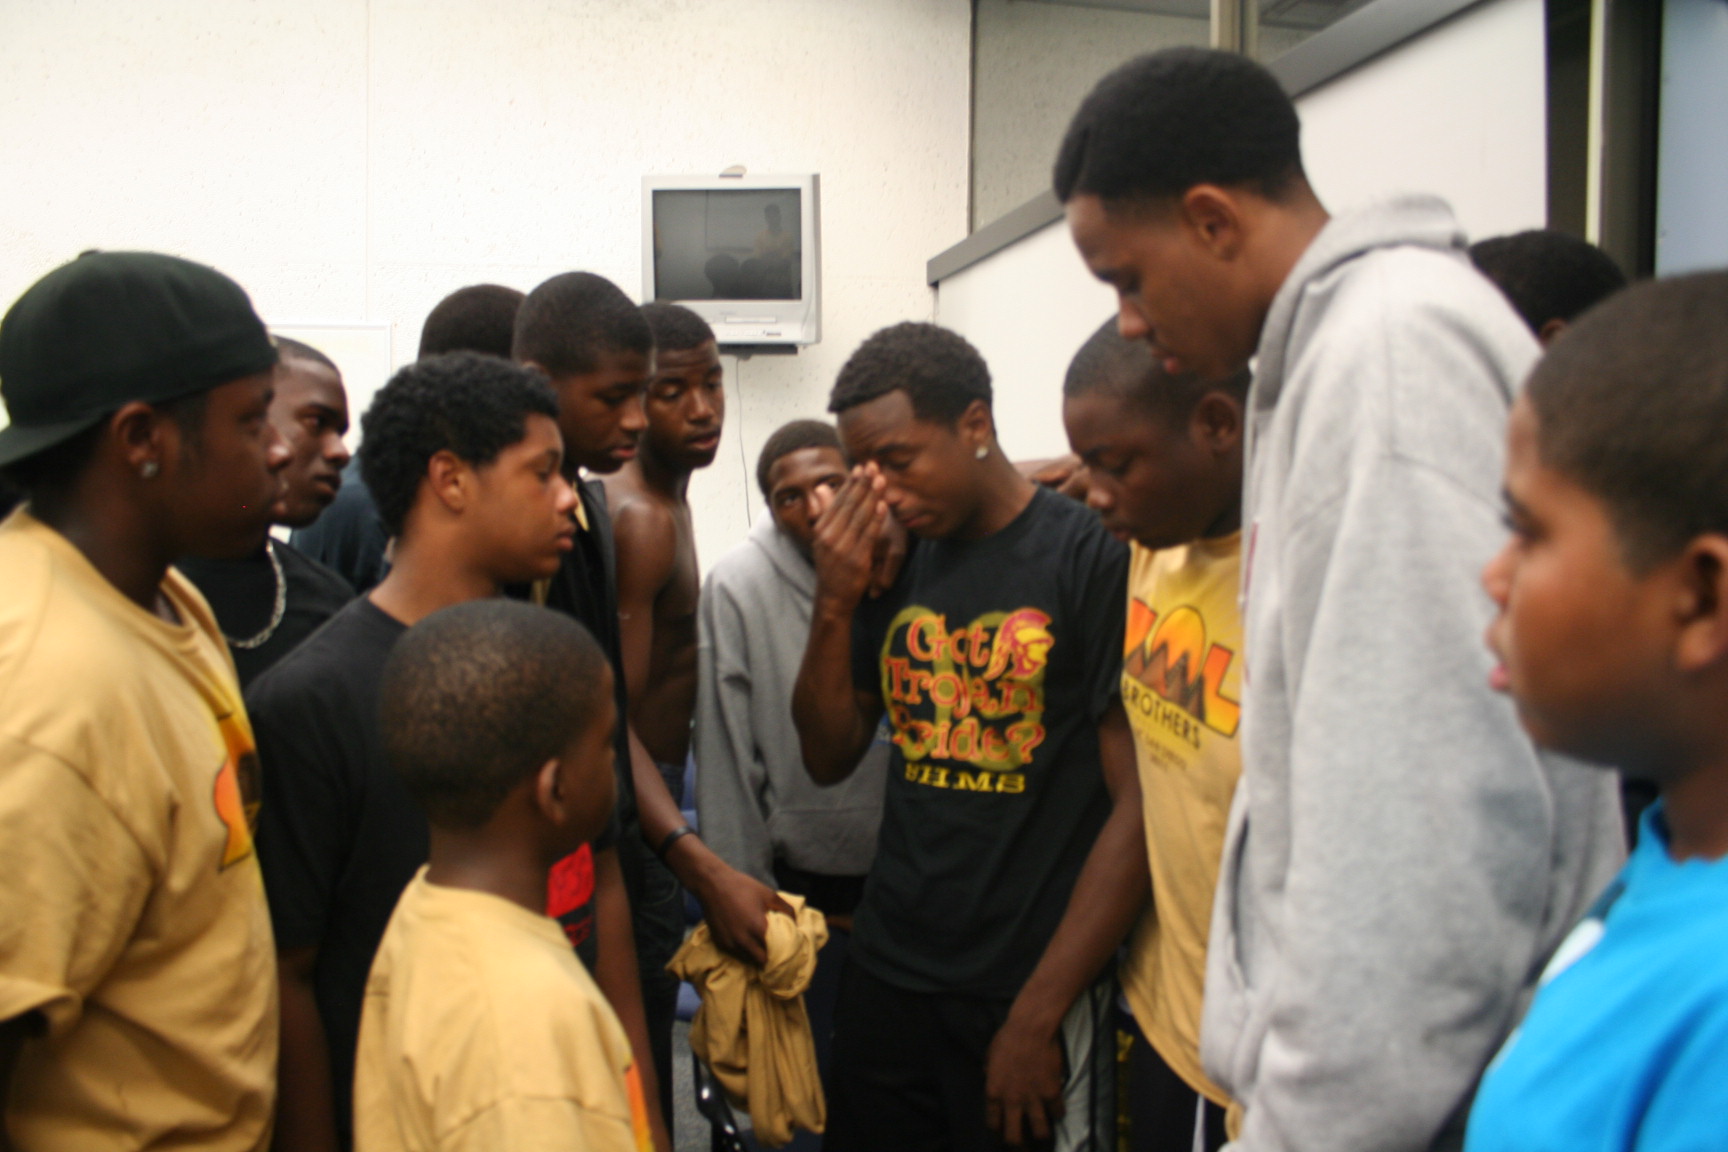 Young men learn to succeed beyond expectations